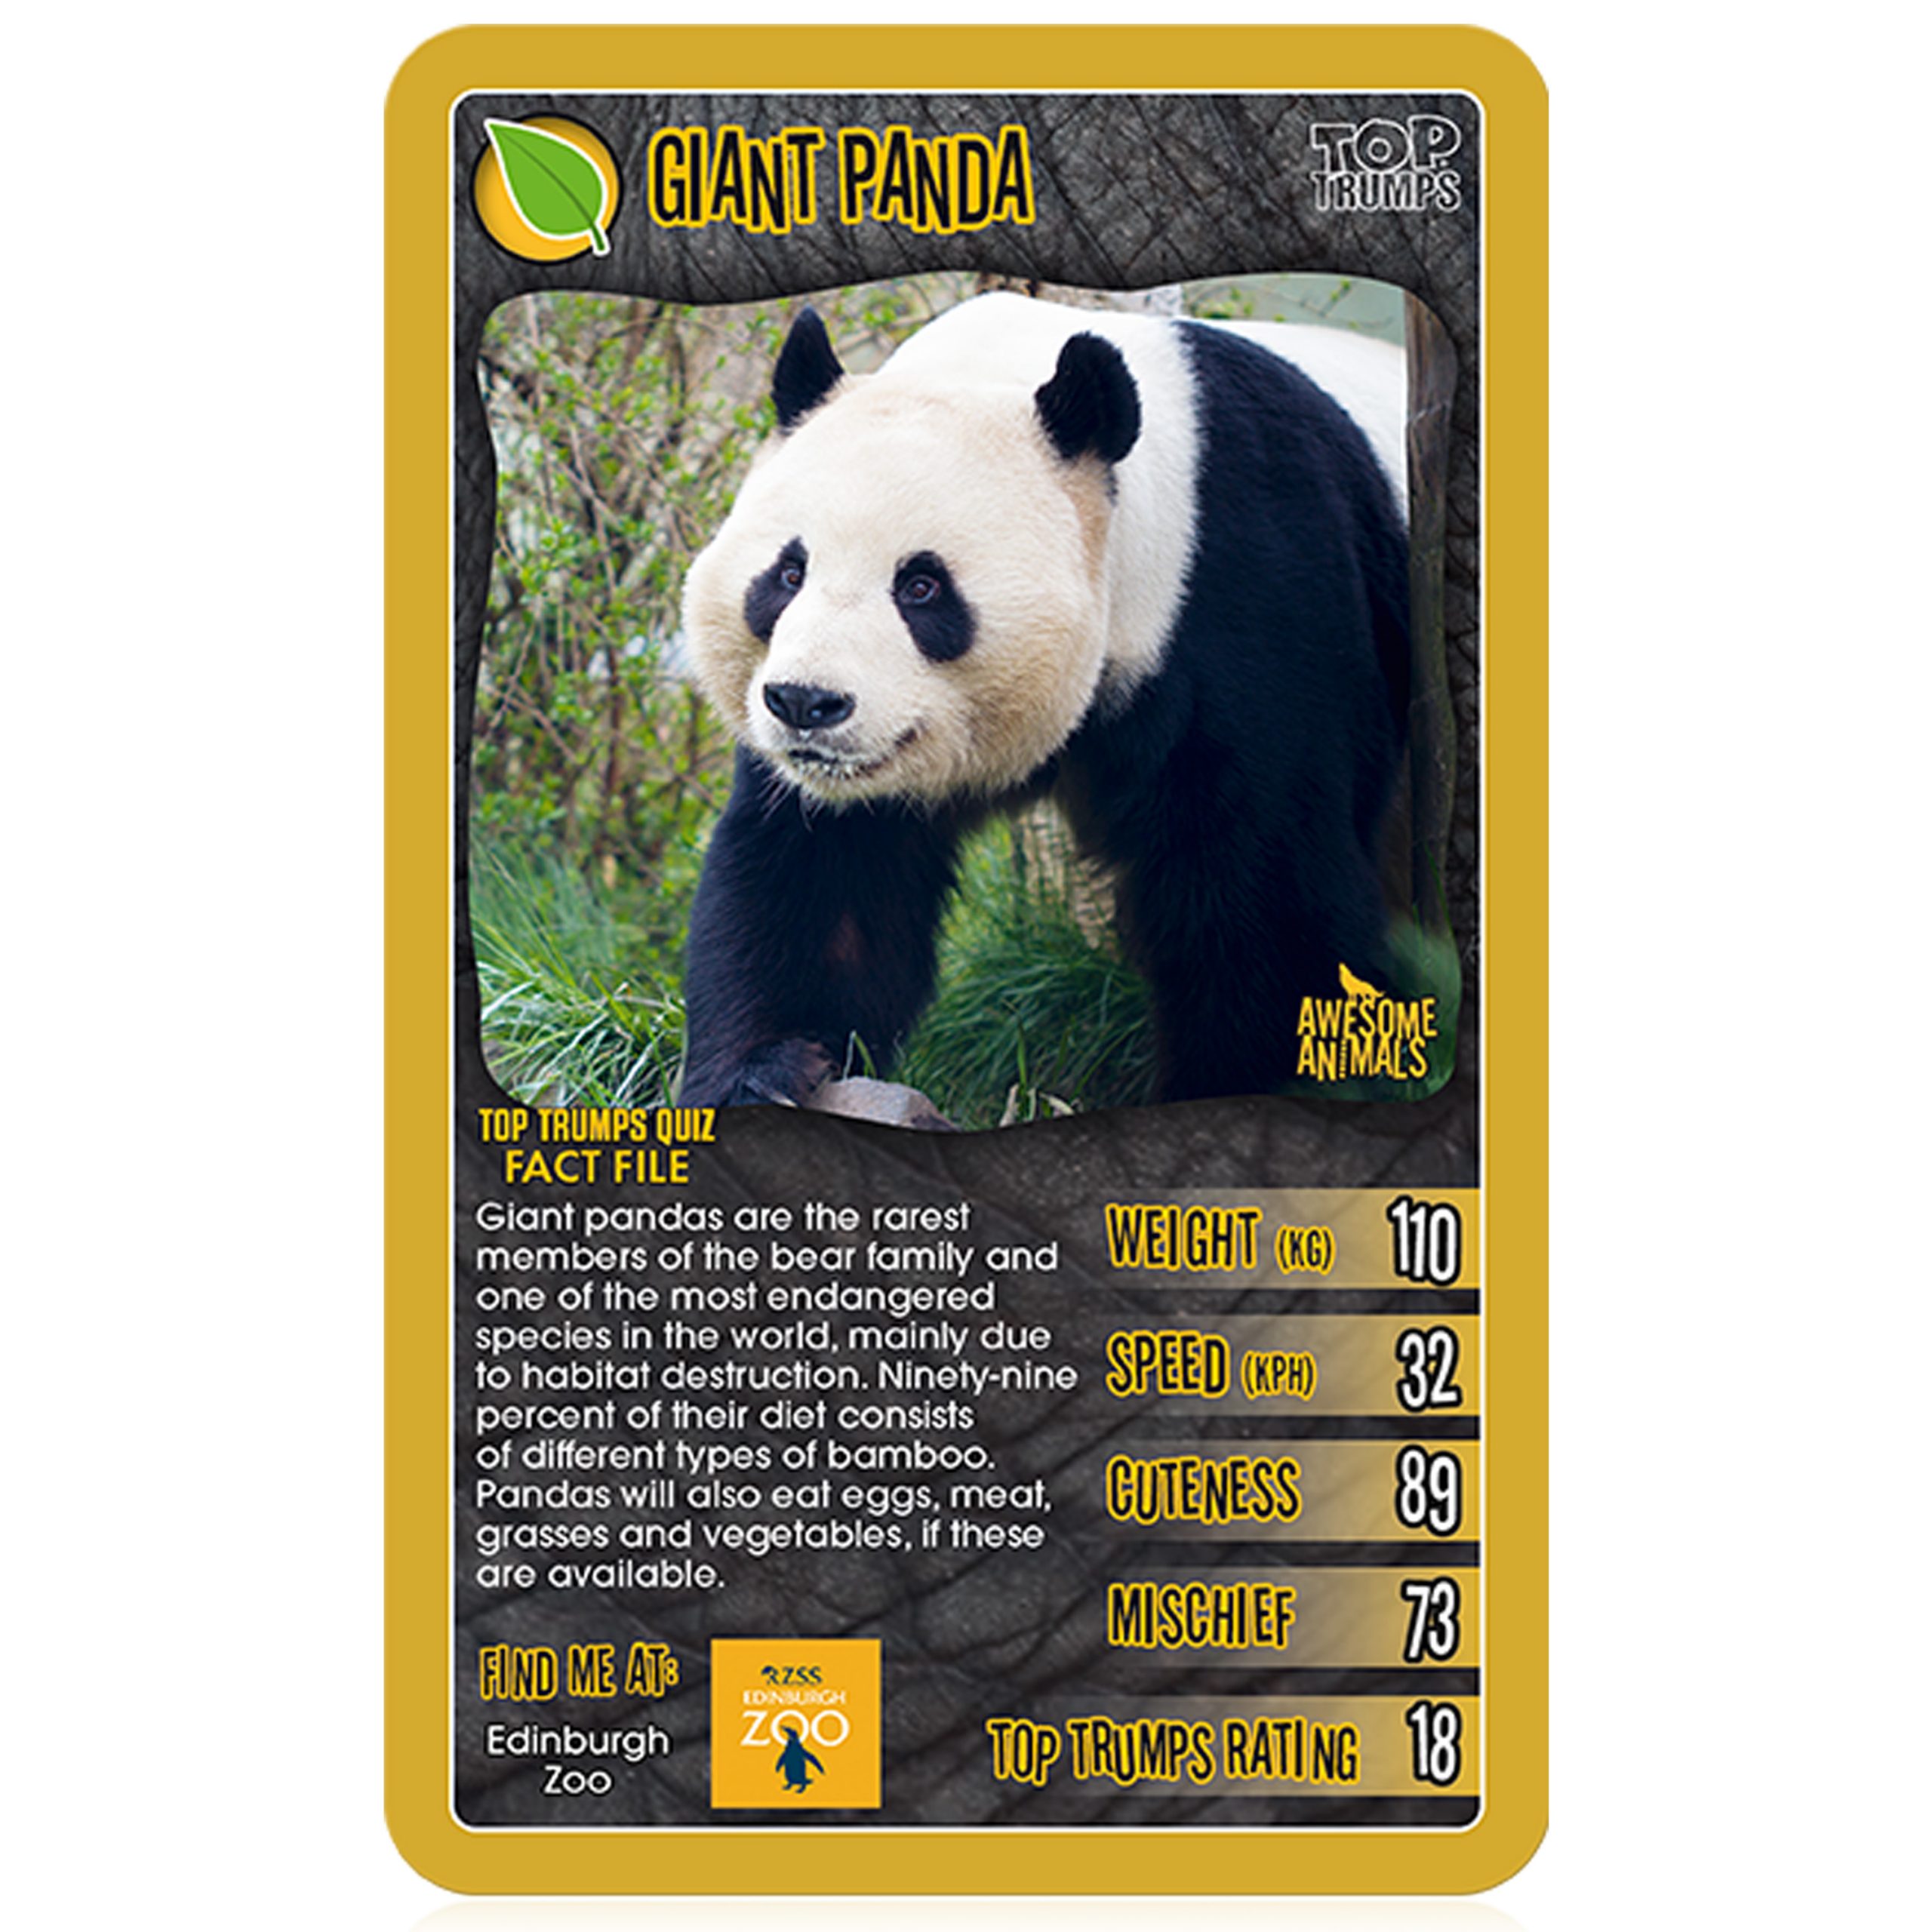 Awesome Animals Top Trumps